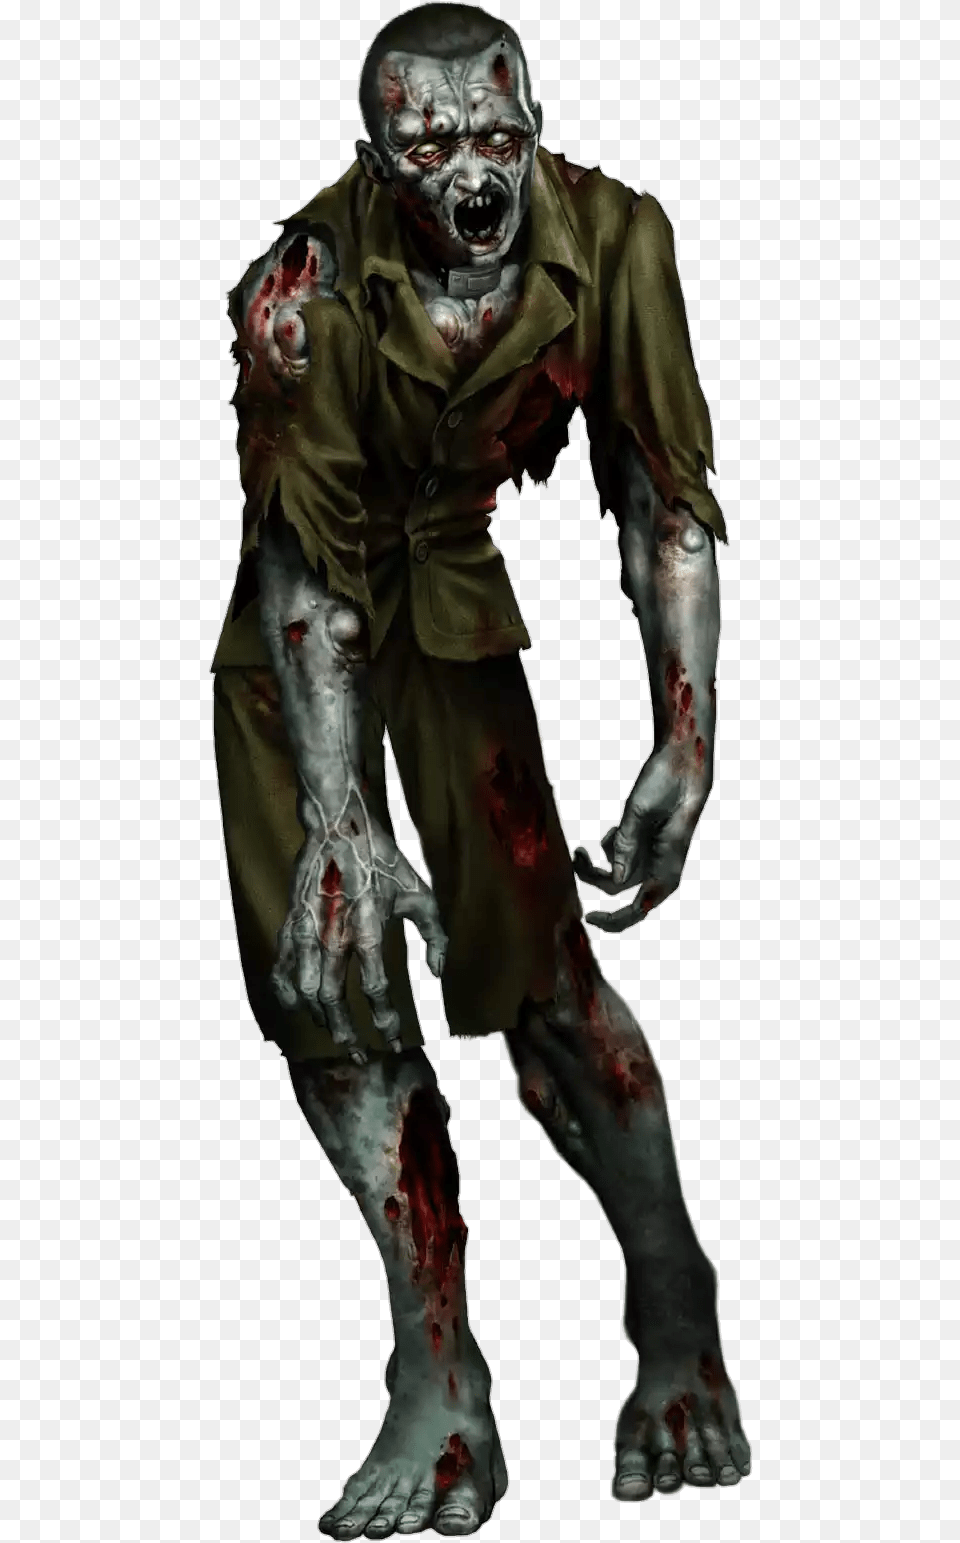 Creepy Zombie Clip Arts Resident Evil Code Veronica Zombie, Adult, Alien, Clothing, Costume Png Image